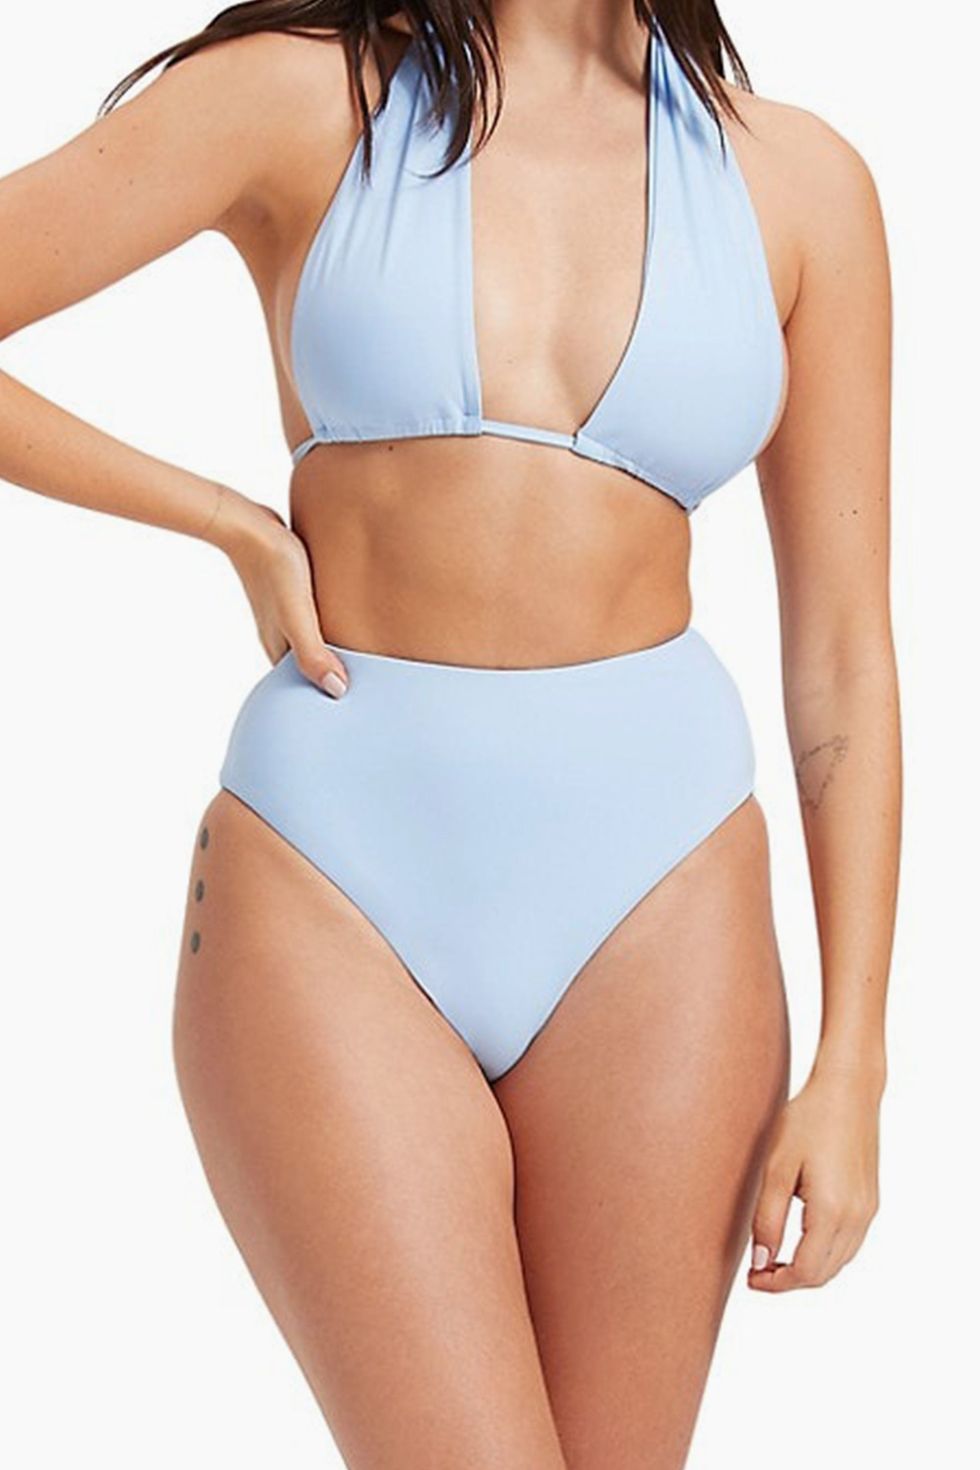 20 Flattering High Waisted Bikinis for 2022- Retro High-Waisted Style  Swimsuits